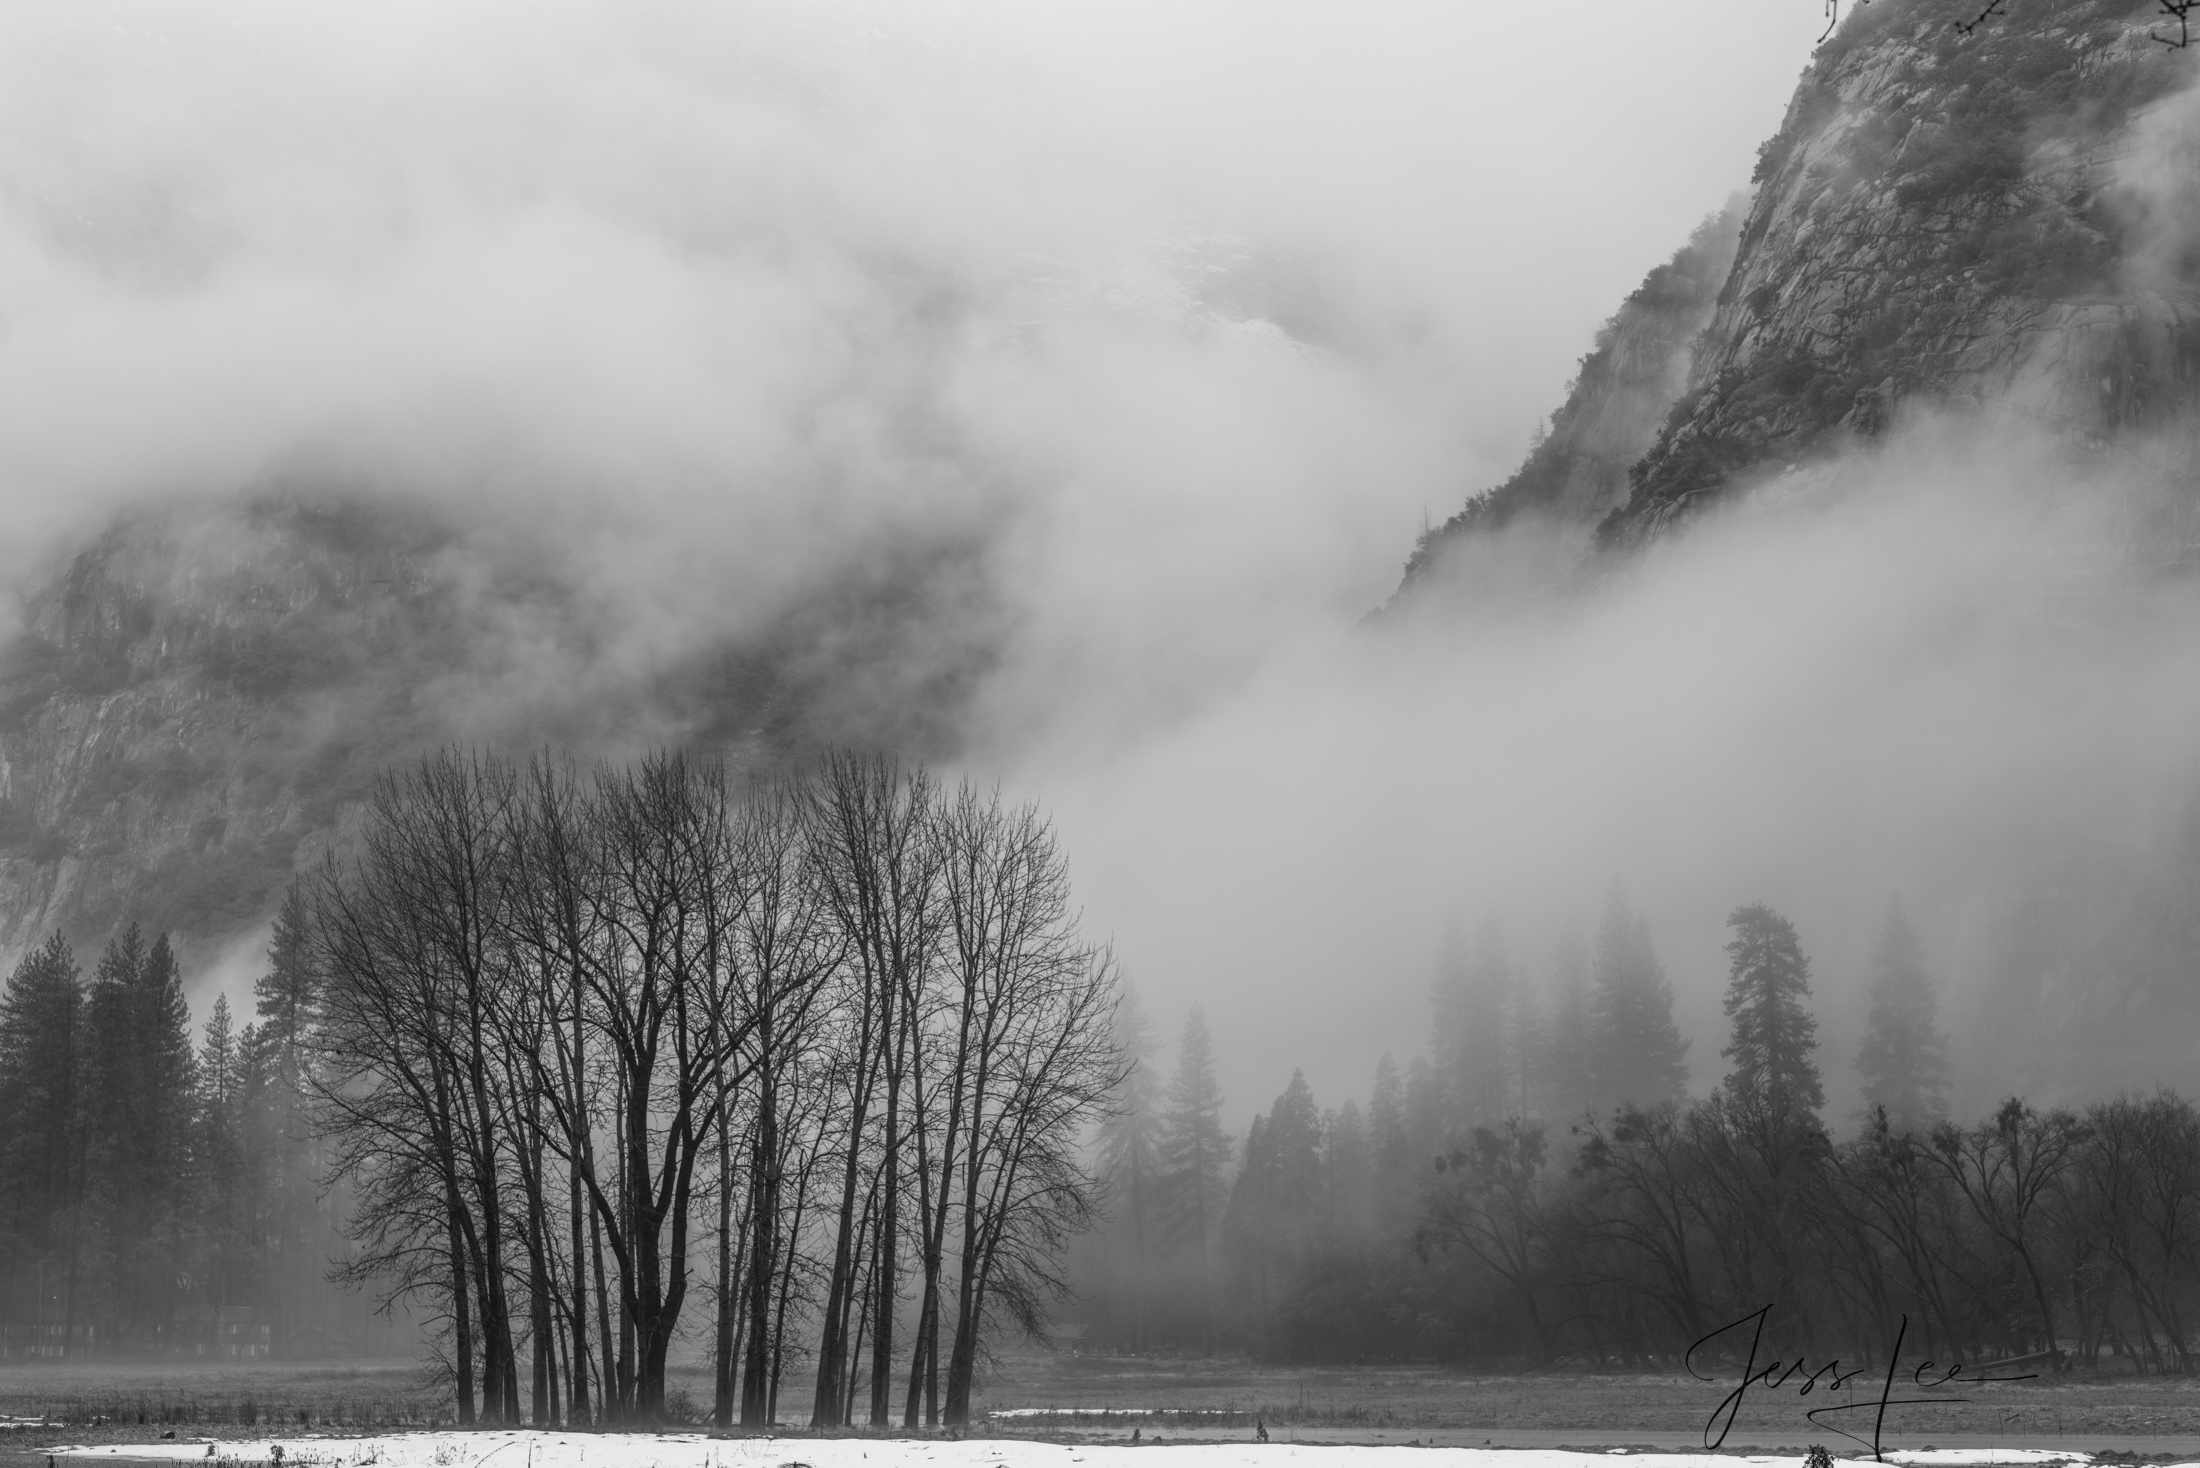 An early morning scene in Yosemite National Park, captured in classic black and white. A silhouetted stand of trees stands guard...